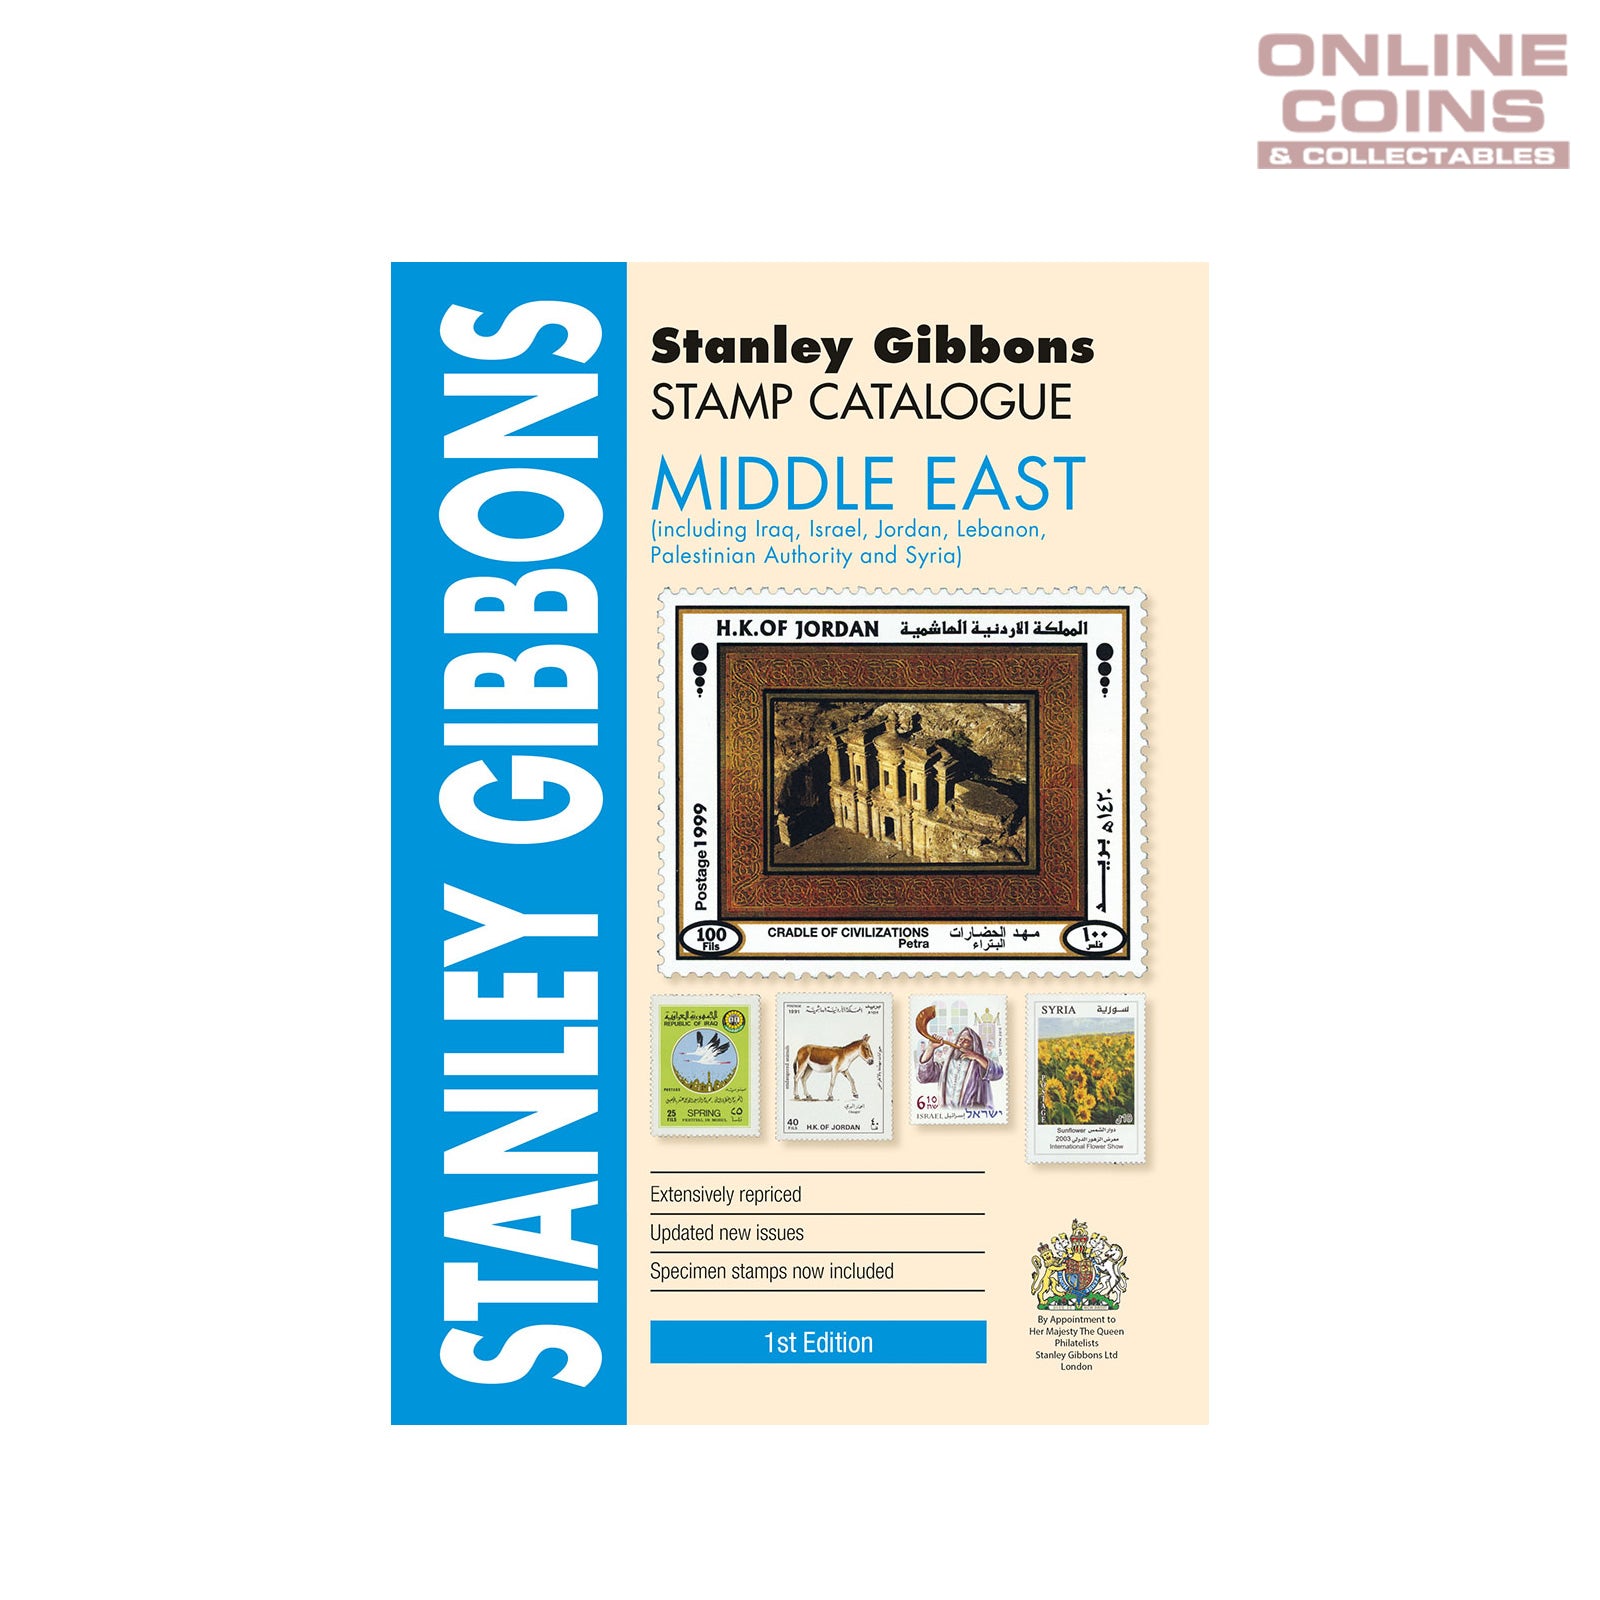 2018 Stanley Gibbons - Stamp Catalogue Middle East Soft Cover Book 1st Edition